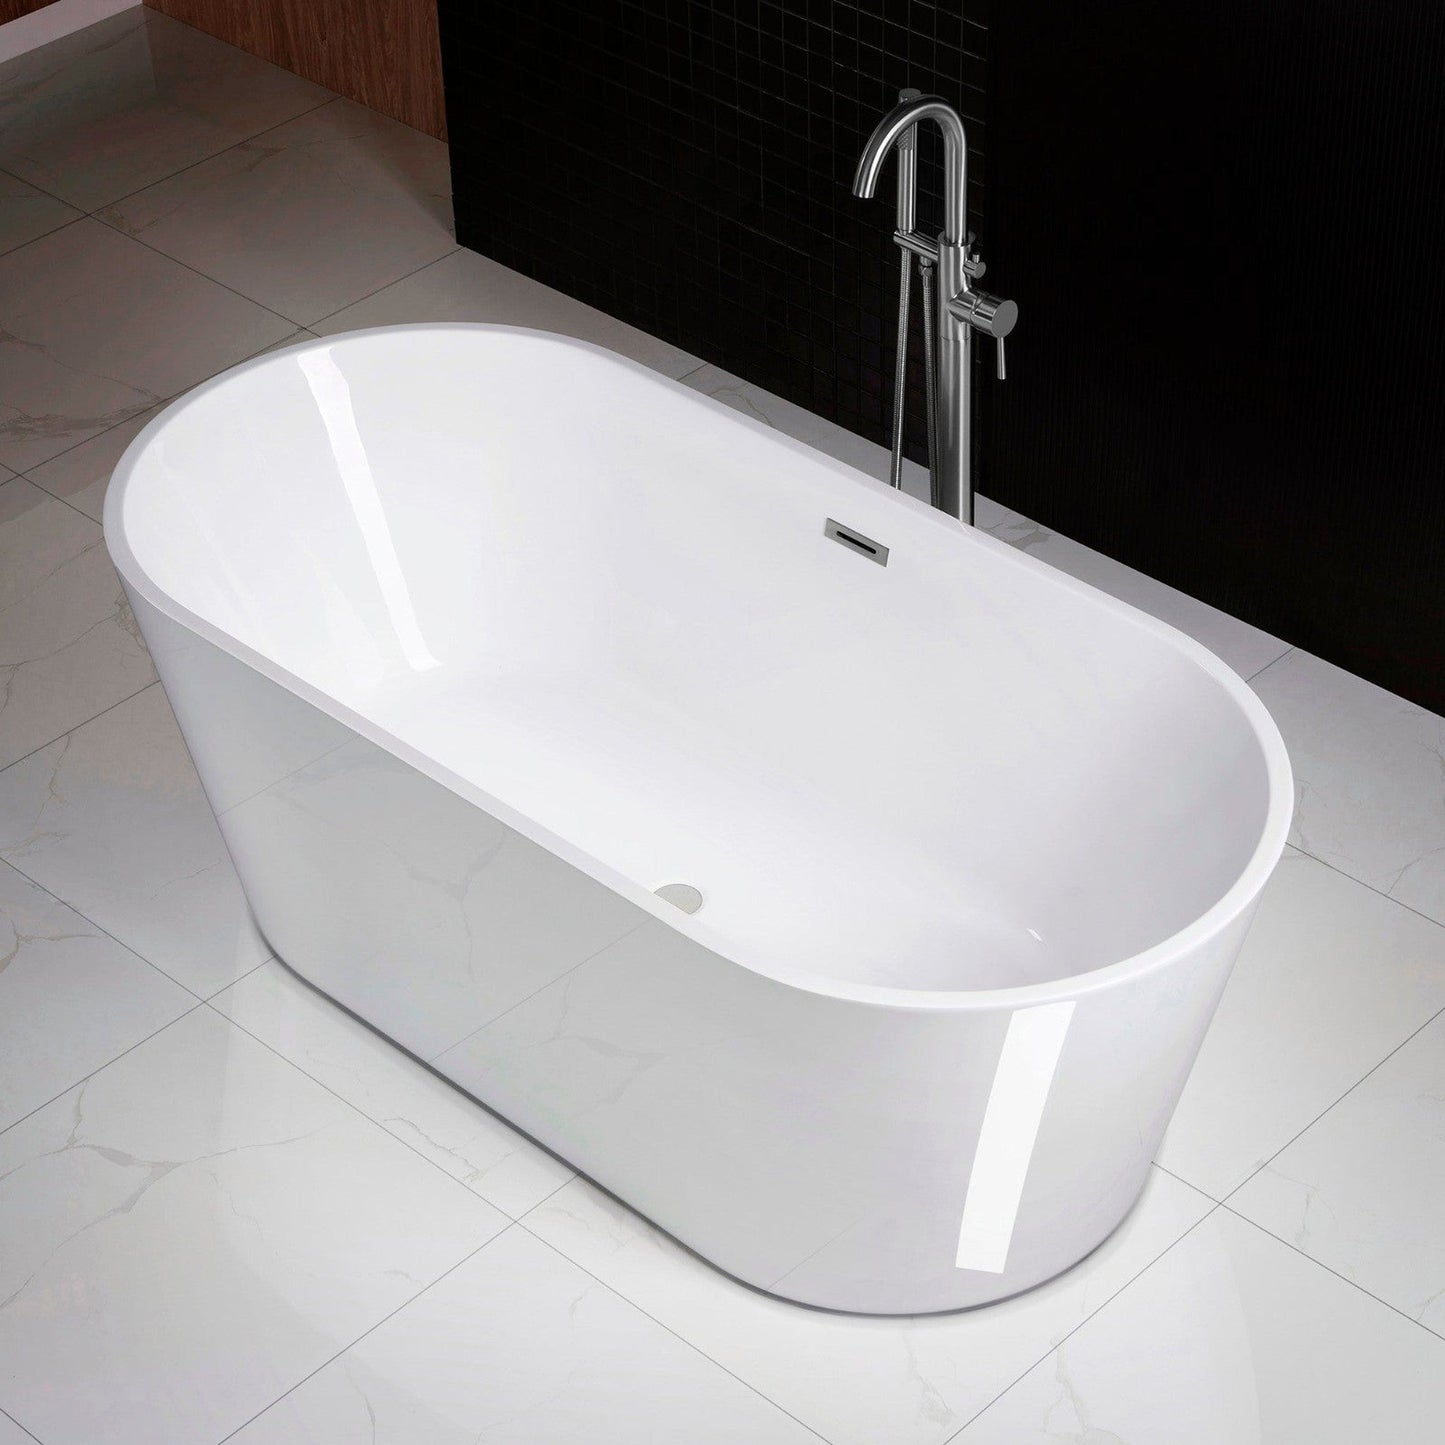 WoodBridge 71" White Acrylic Freestanding Contemporary Soaking Bathtub With Chrome Drain, Overflow, F0002CHVT Tub Filler and Caddy Tray